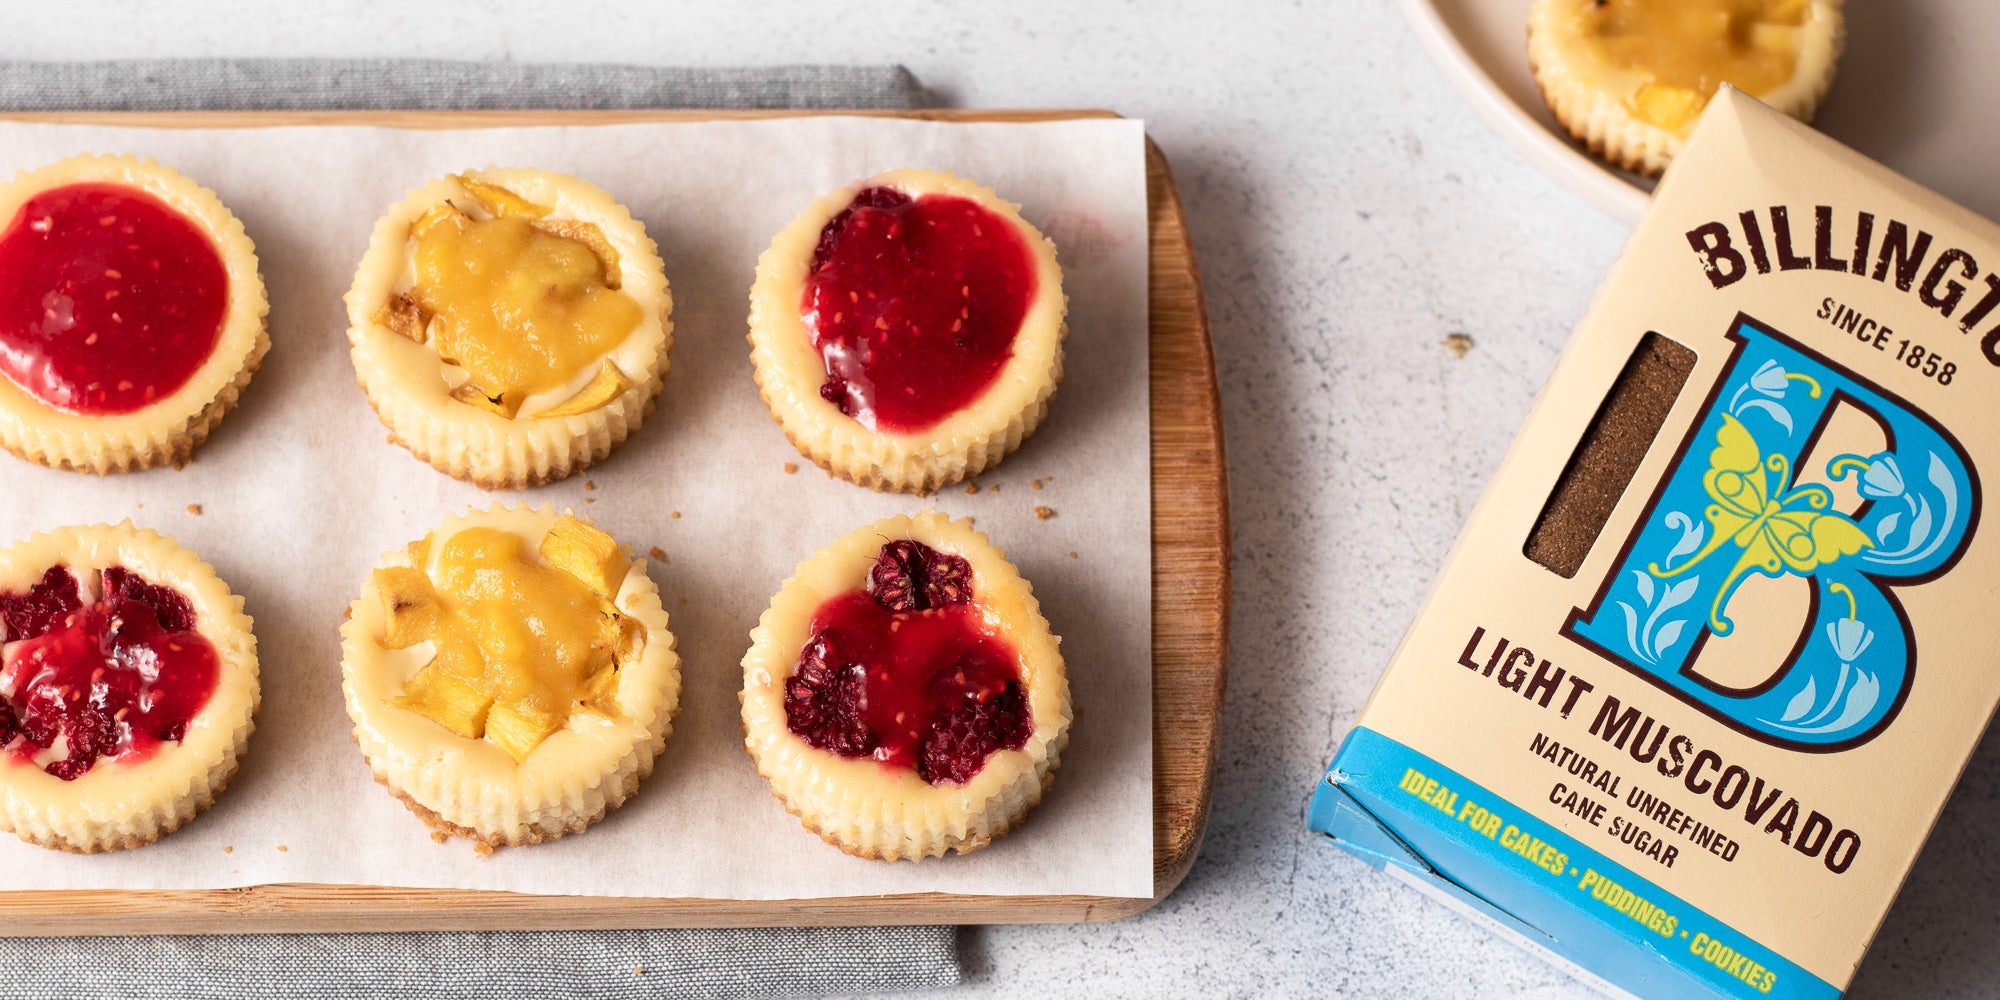 Mini cheesecakes topped with fruit on a wooden board next to sugar pack